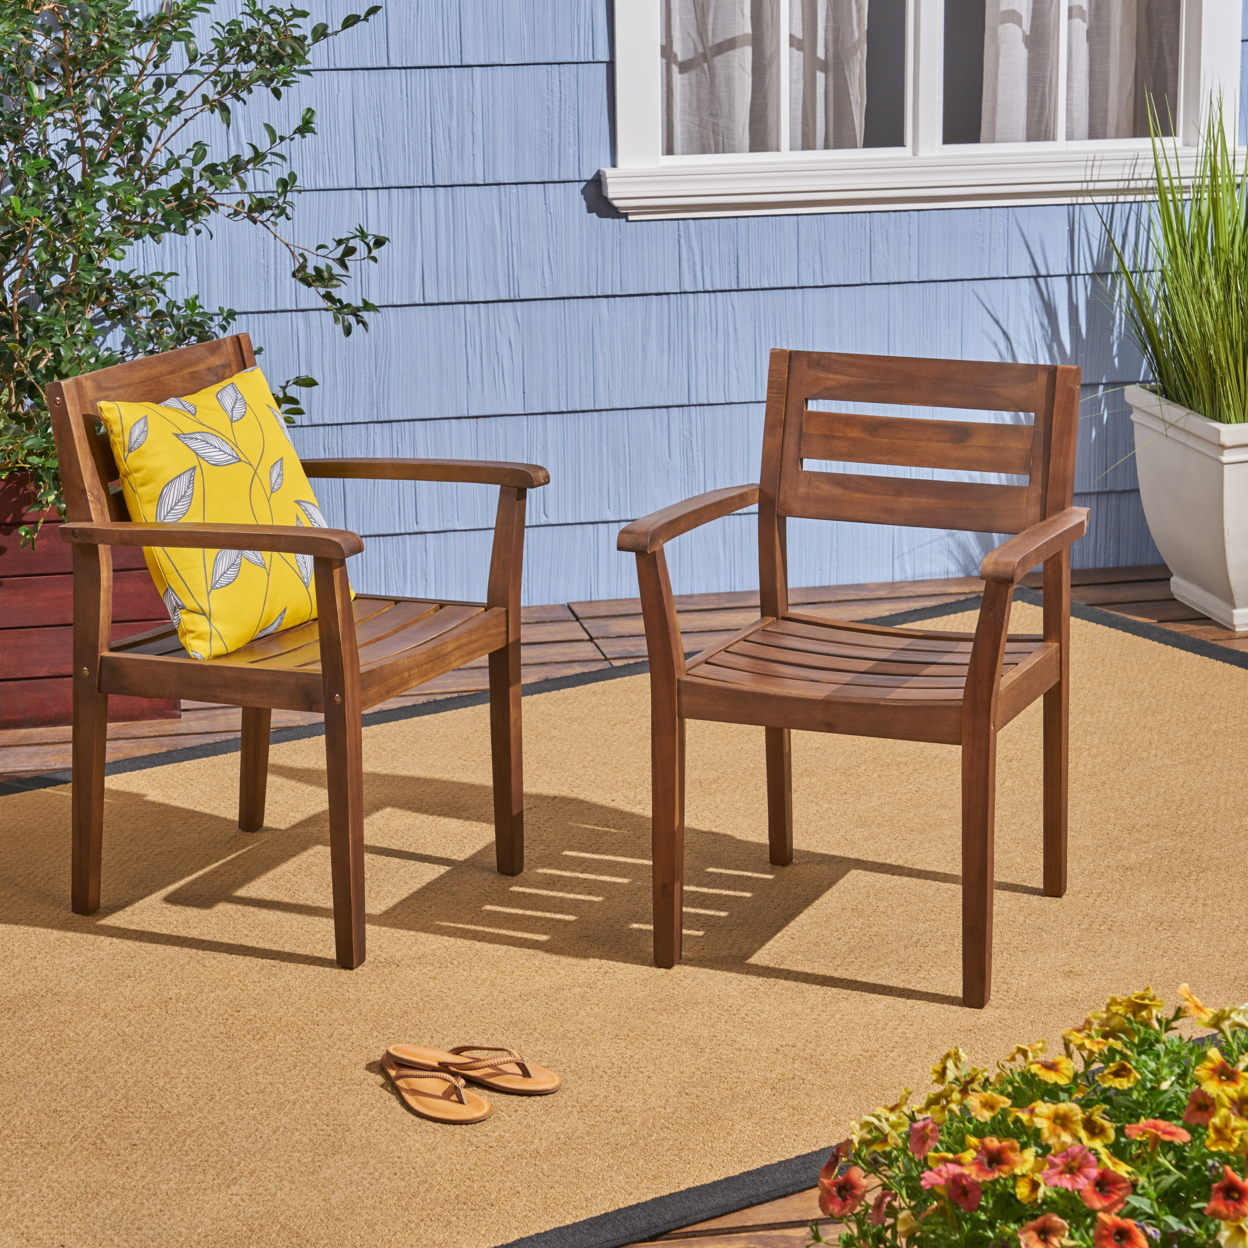 Stanford Outdoor Rustic Acacia Wood Dining Chairs With Slat Seats (Set Of 2) - Gray